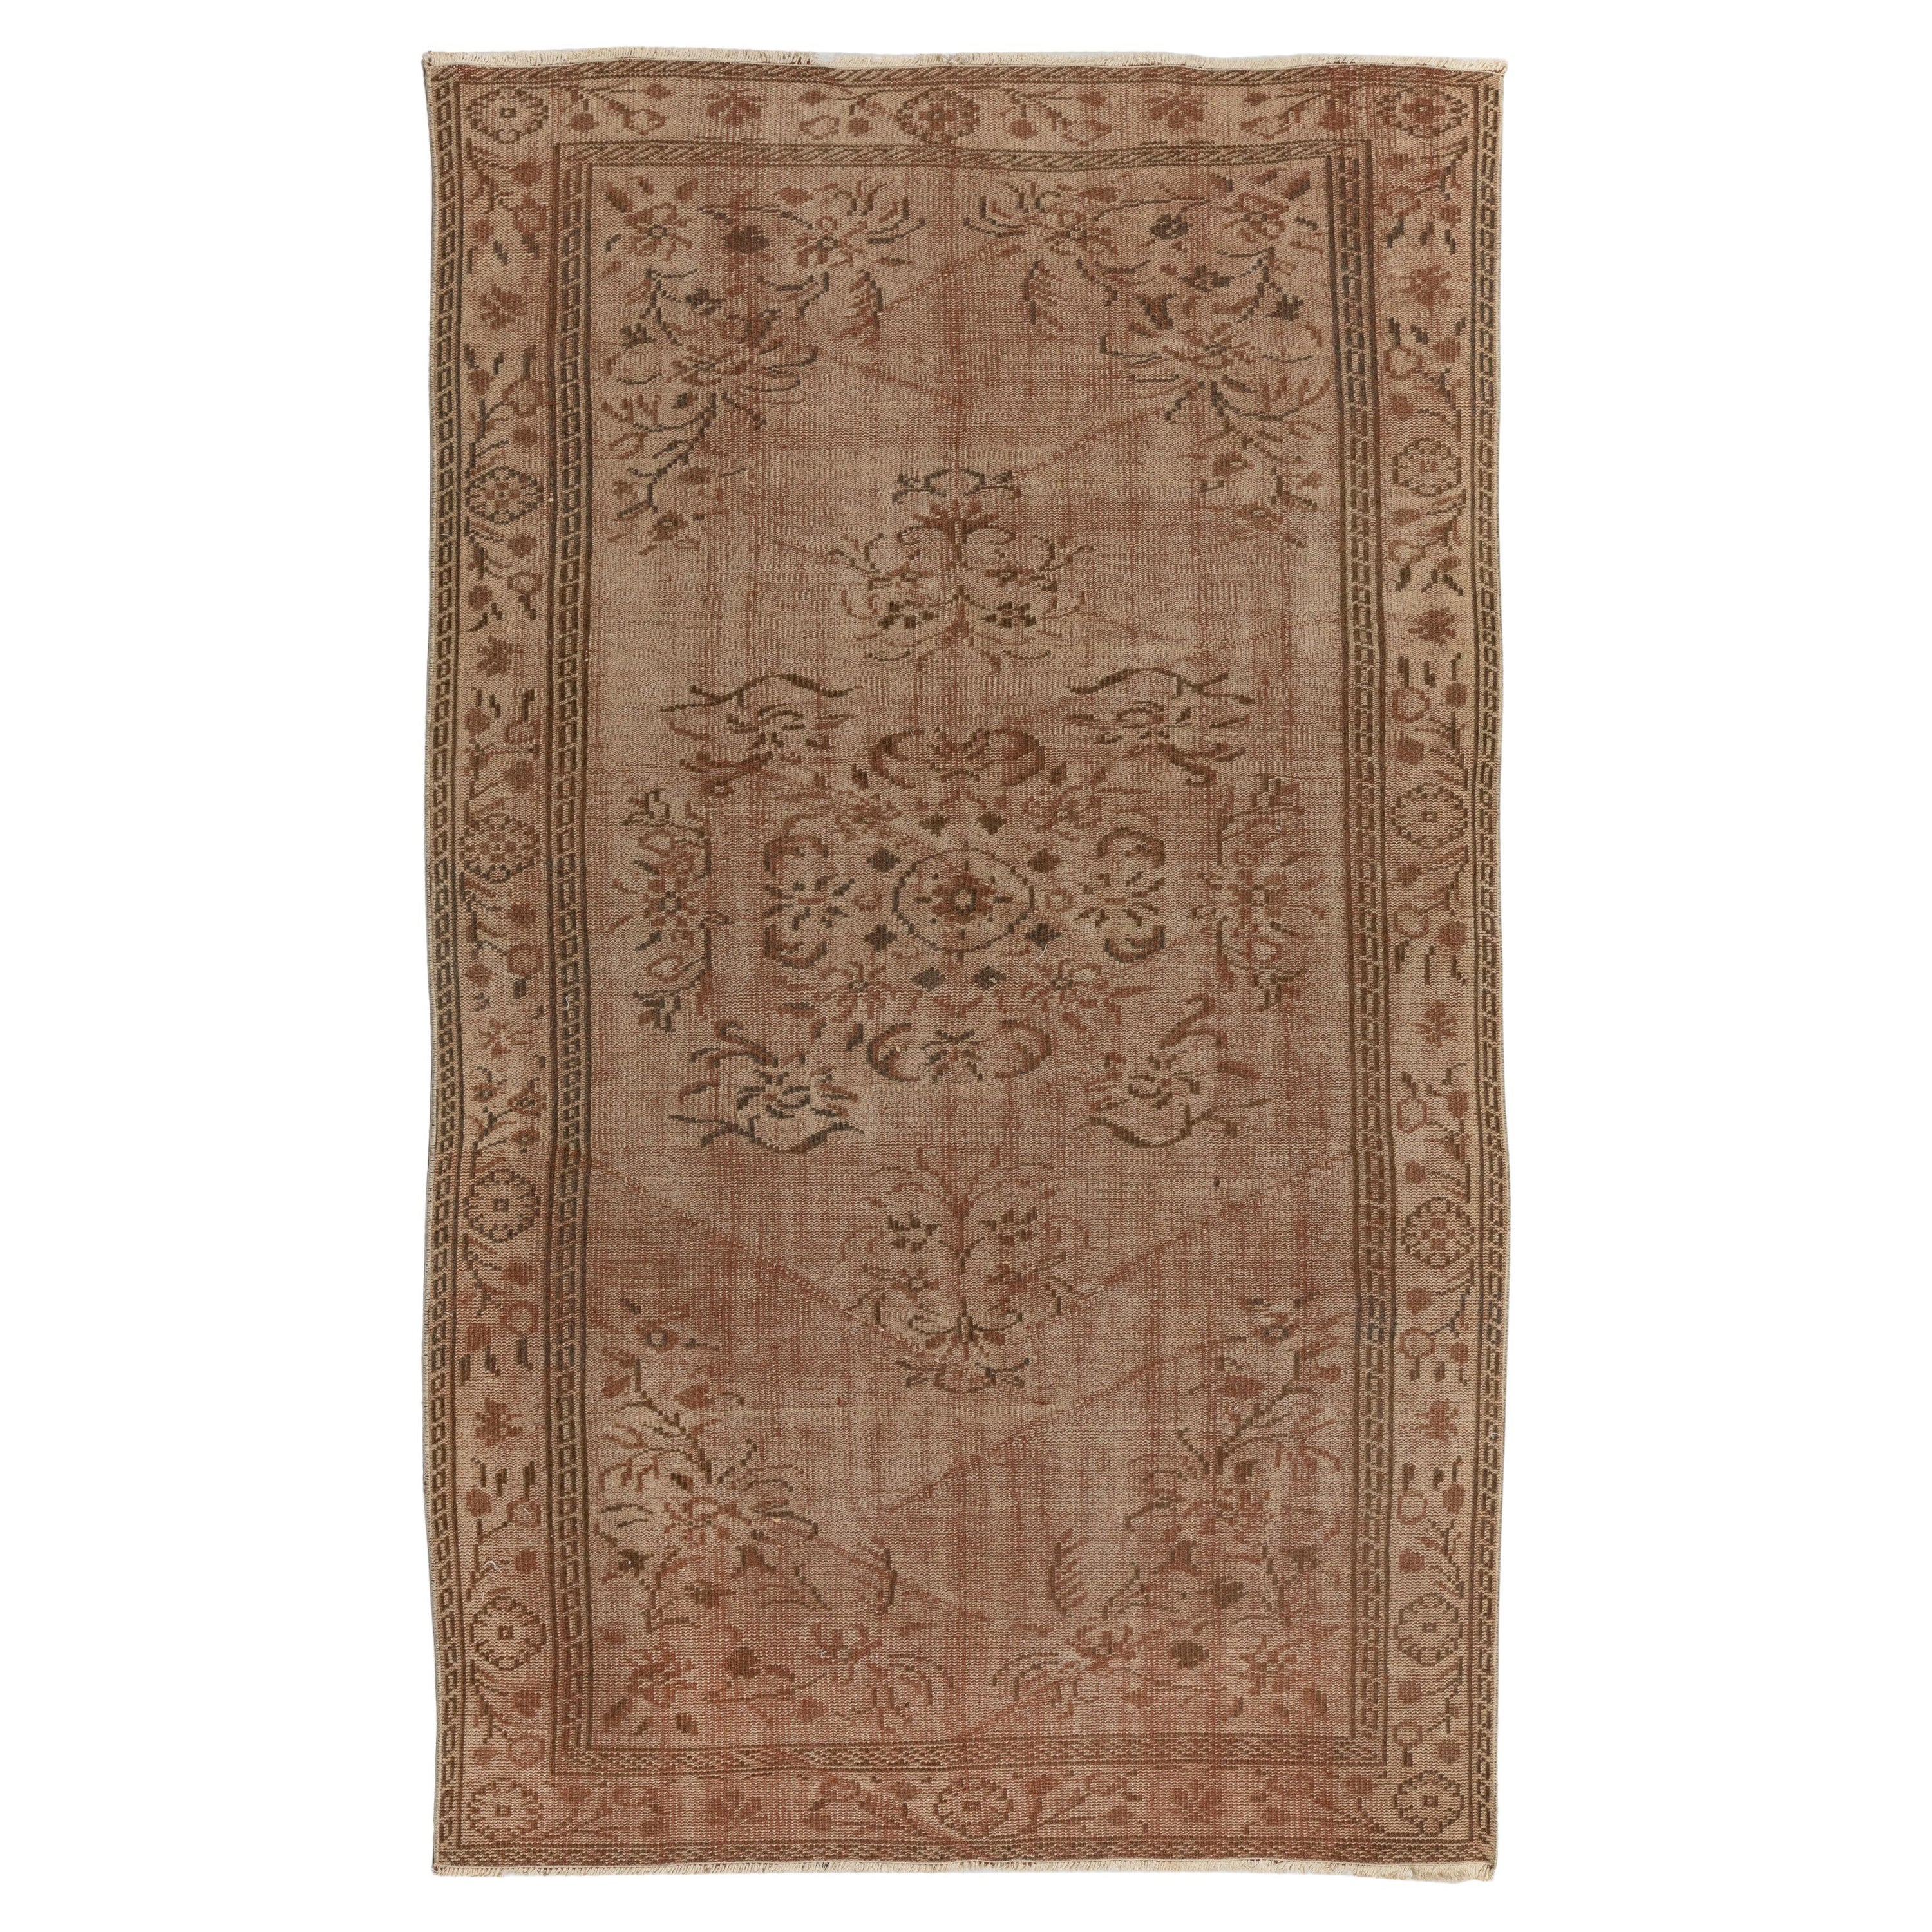 Hand-Knotted Medallion Design Vintage Turkish Area Rug in Brown Colors 5 x 8 ft. For Sale